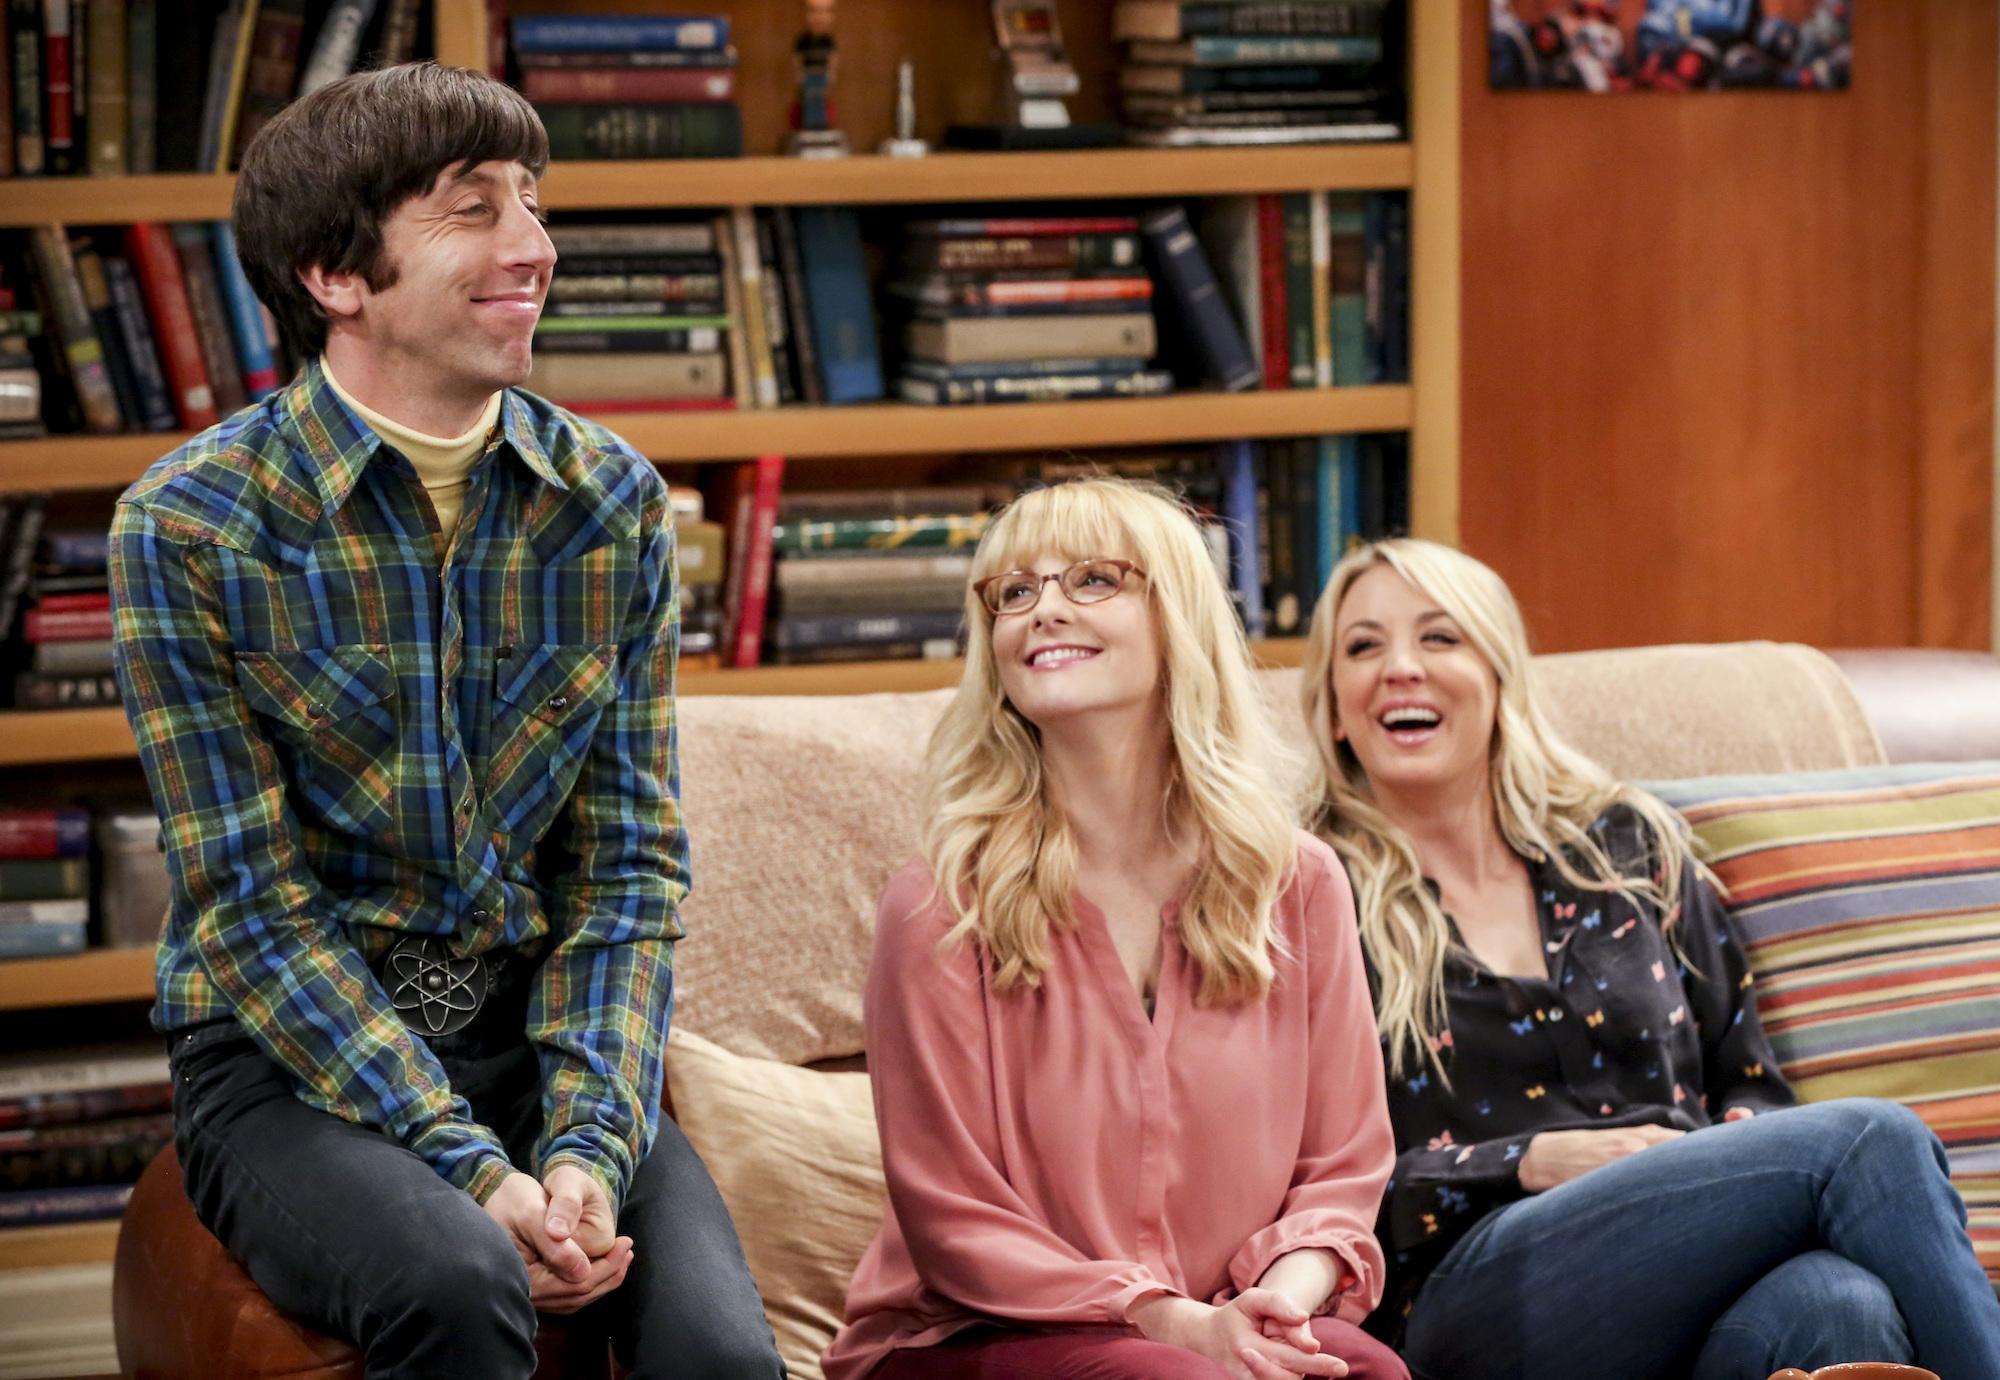 Big Bang Theory: Howard, Bernadette and Penny sit on the couch